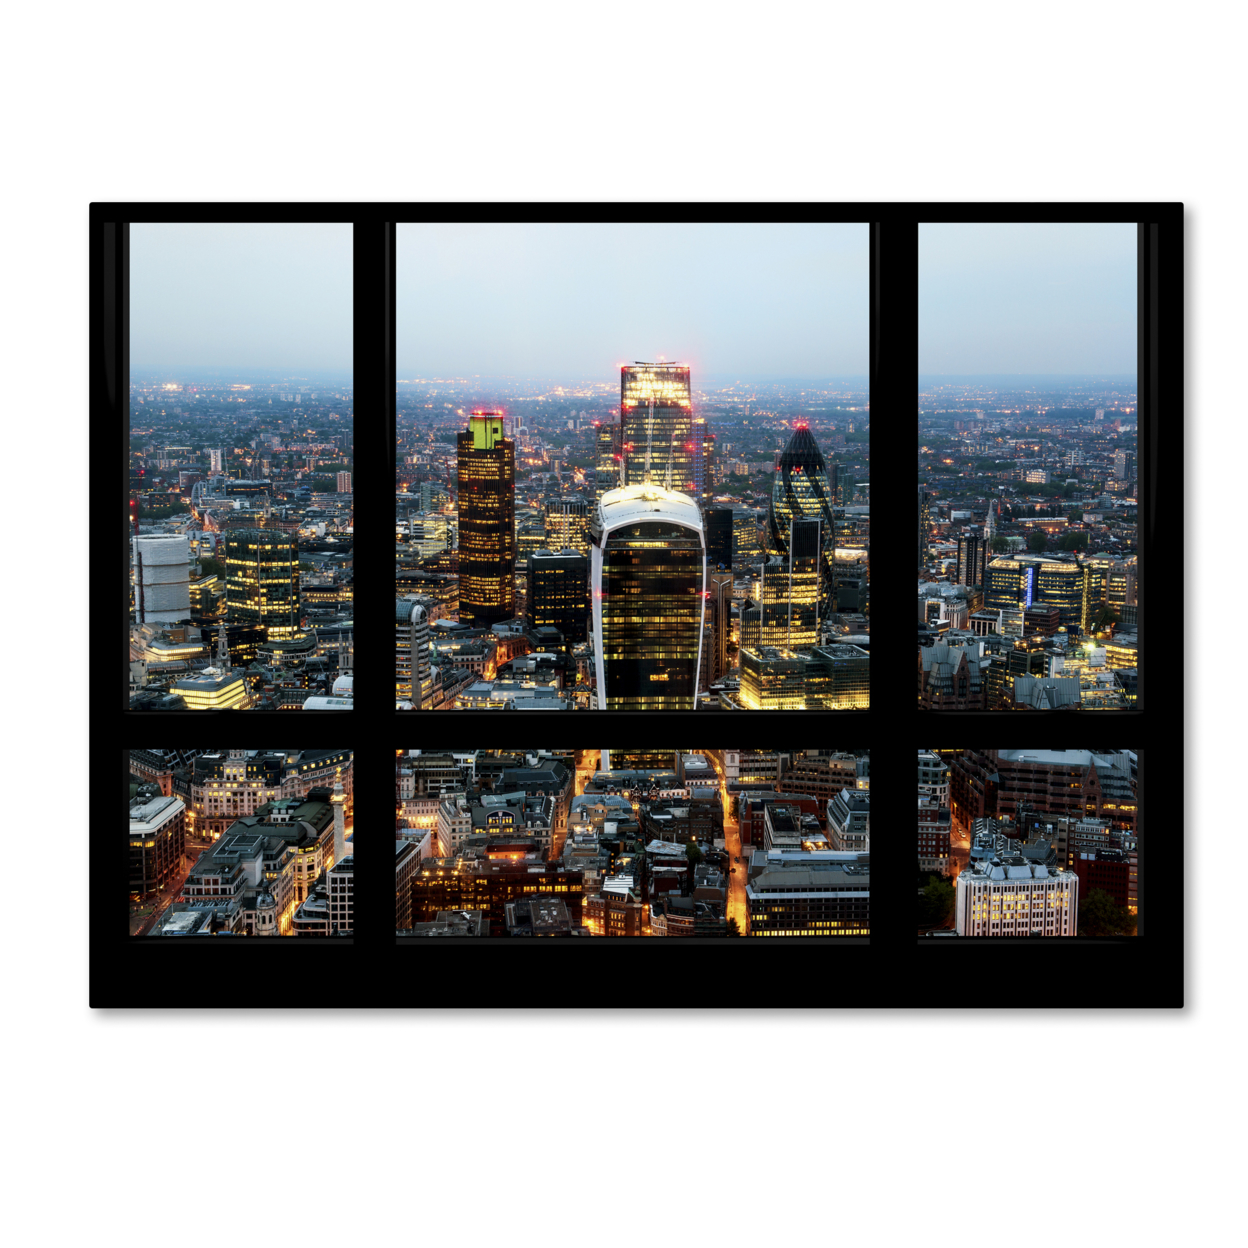 Philippe Hugonnard 'Window View London City 2' Canvas Wall Art 35 X 47 Inches